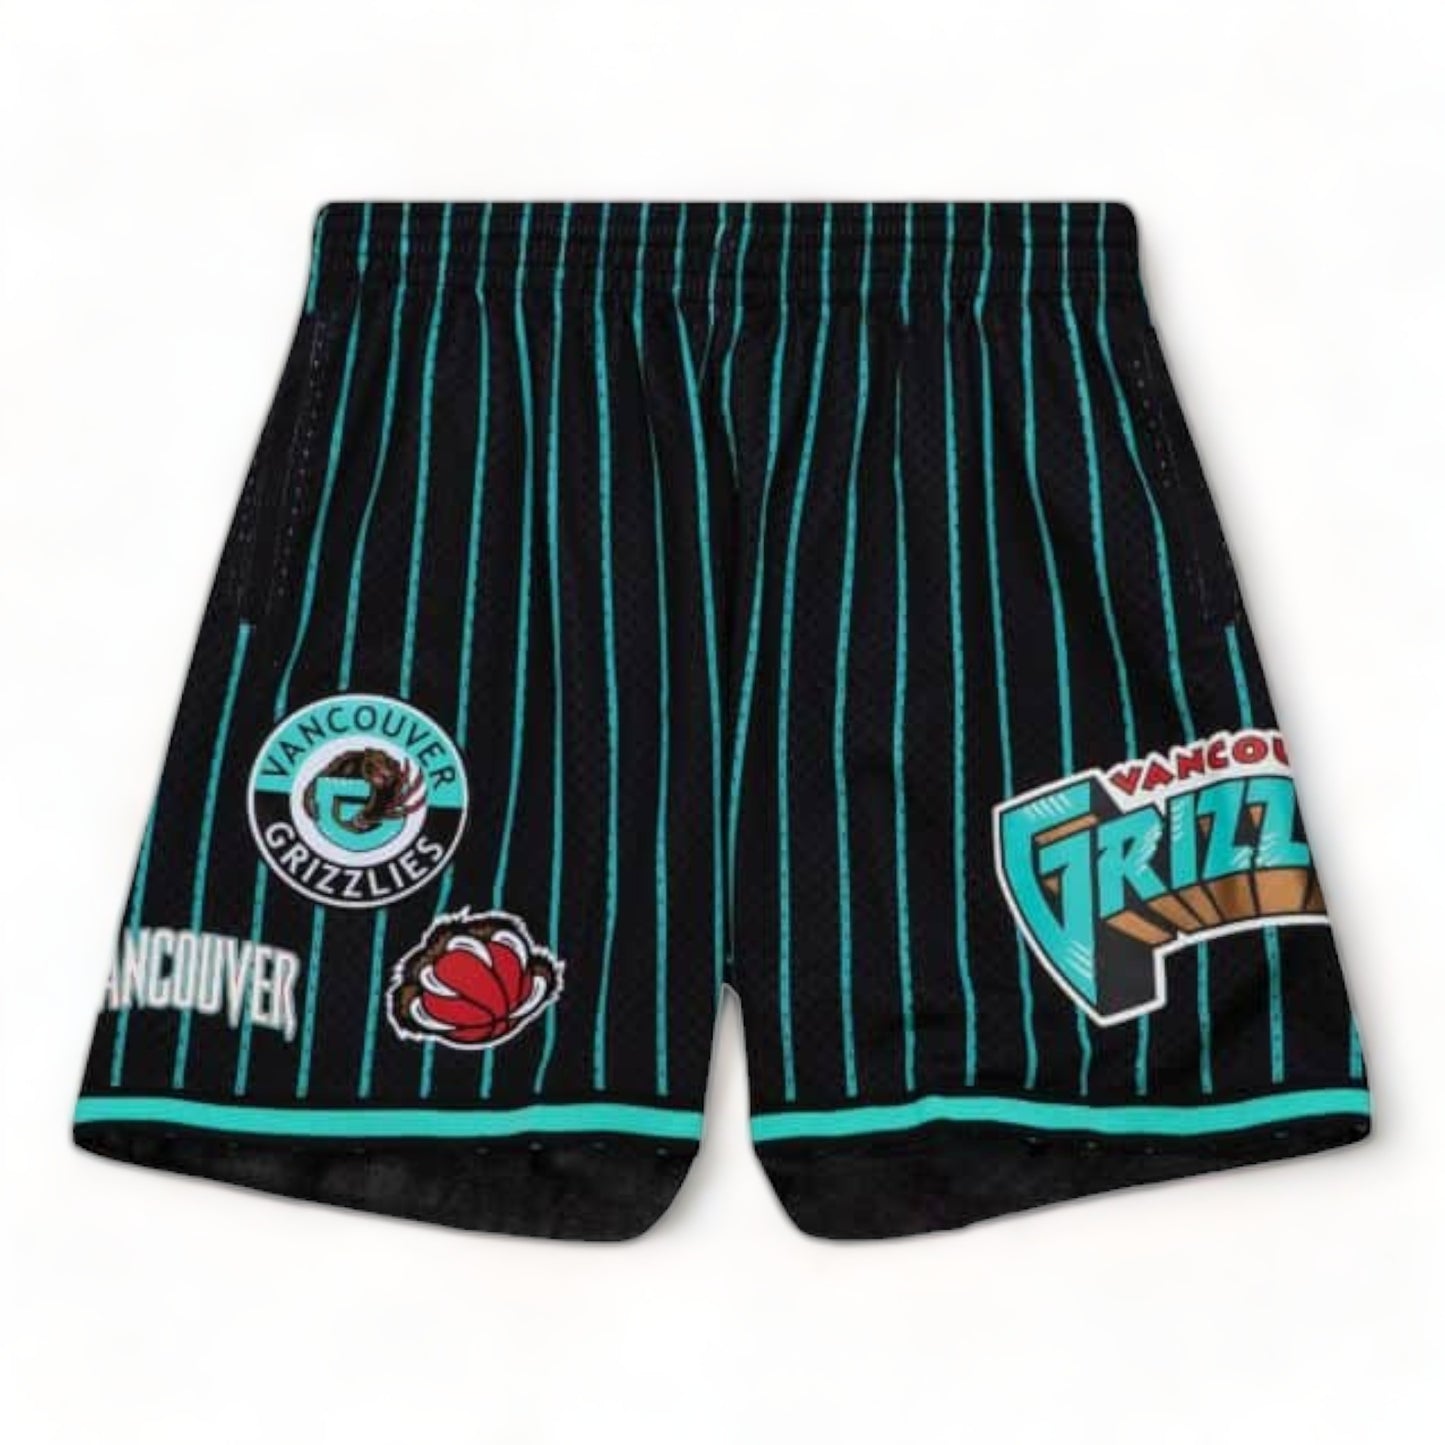 MITCHELL & NESS CITY COLLECTION MESH SHORTS VANCOUVER GRIZZLIES